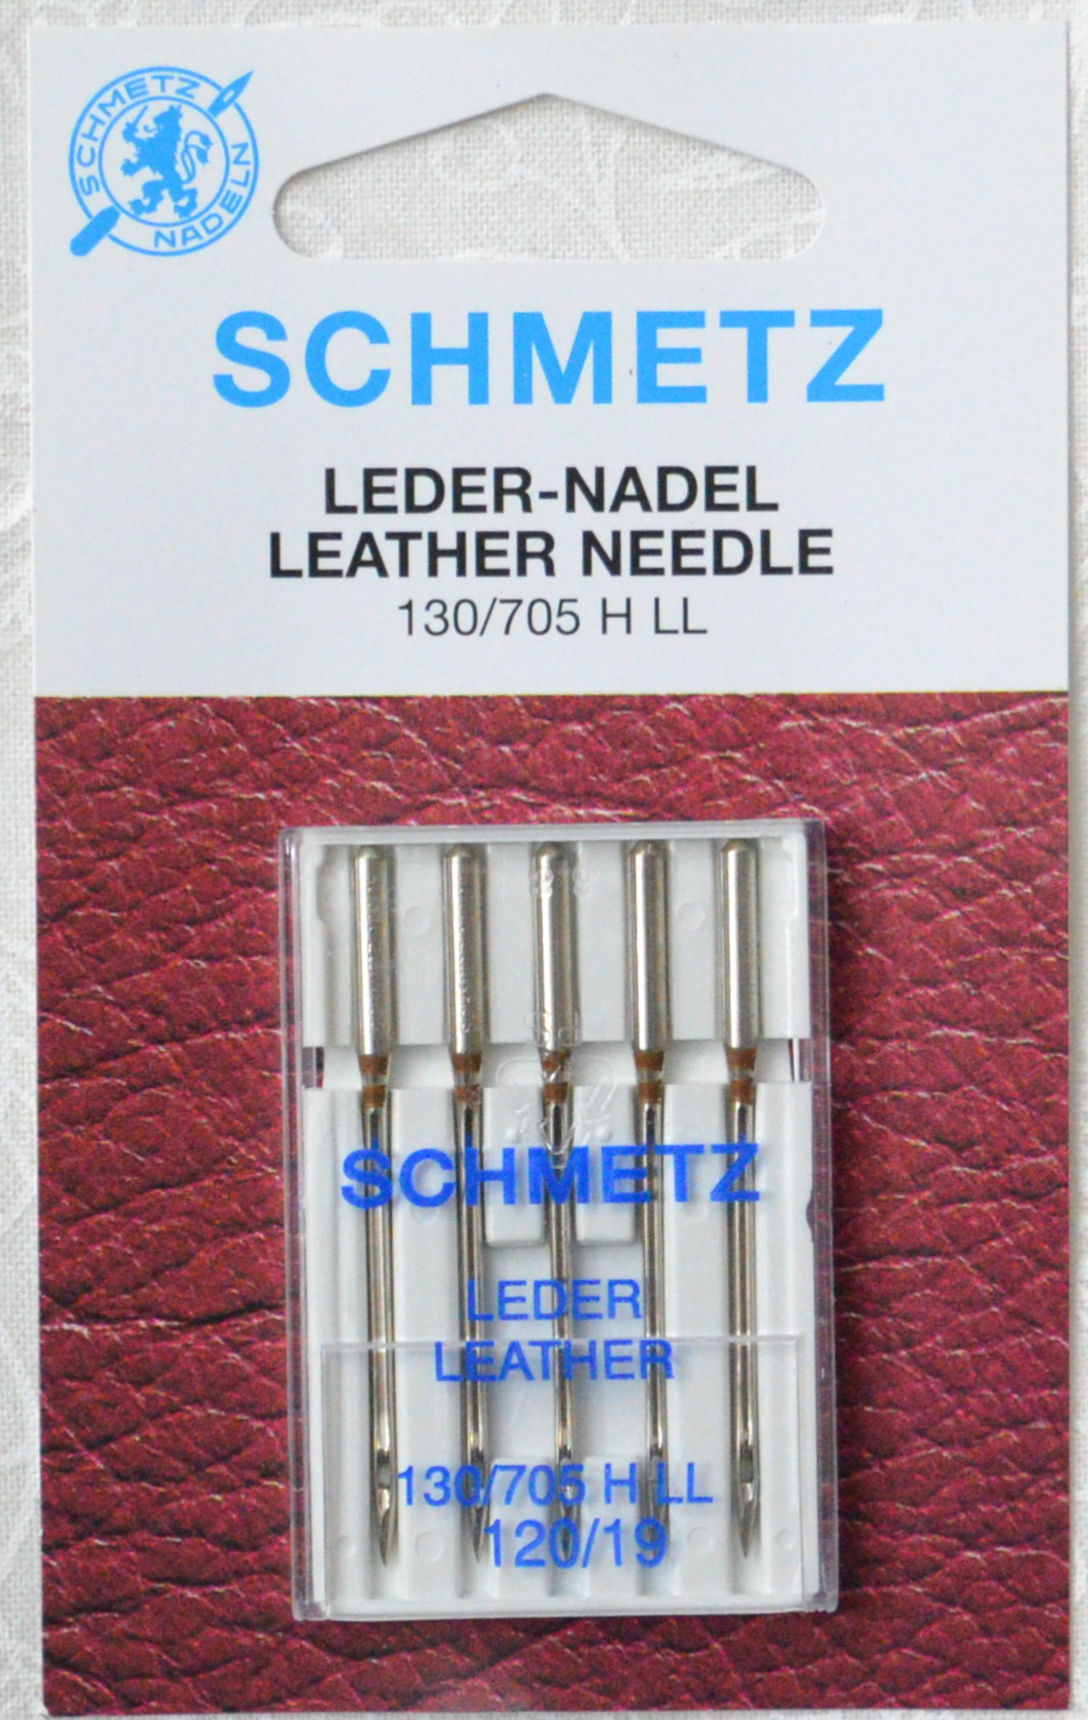 50 Schmetz Embroidery Sewing Machine Needles Box of 10 Cards Assorted Sizes 